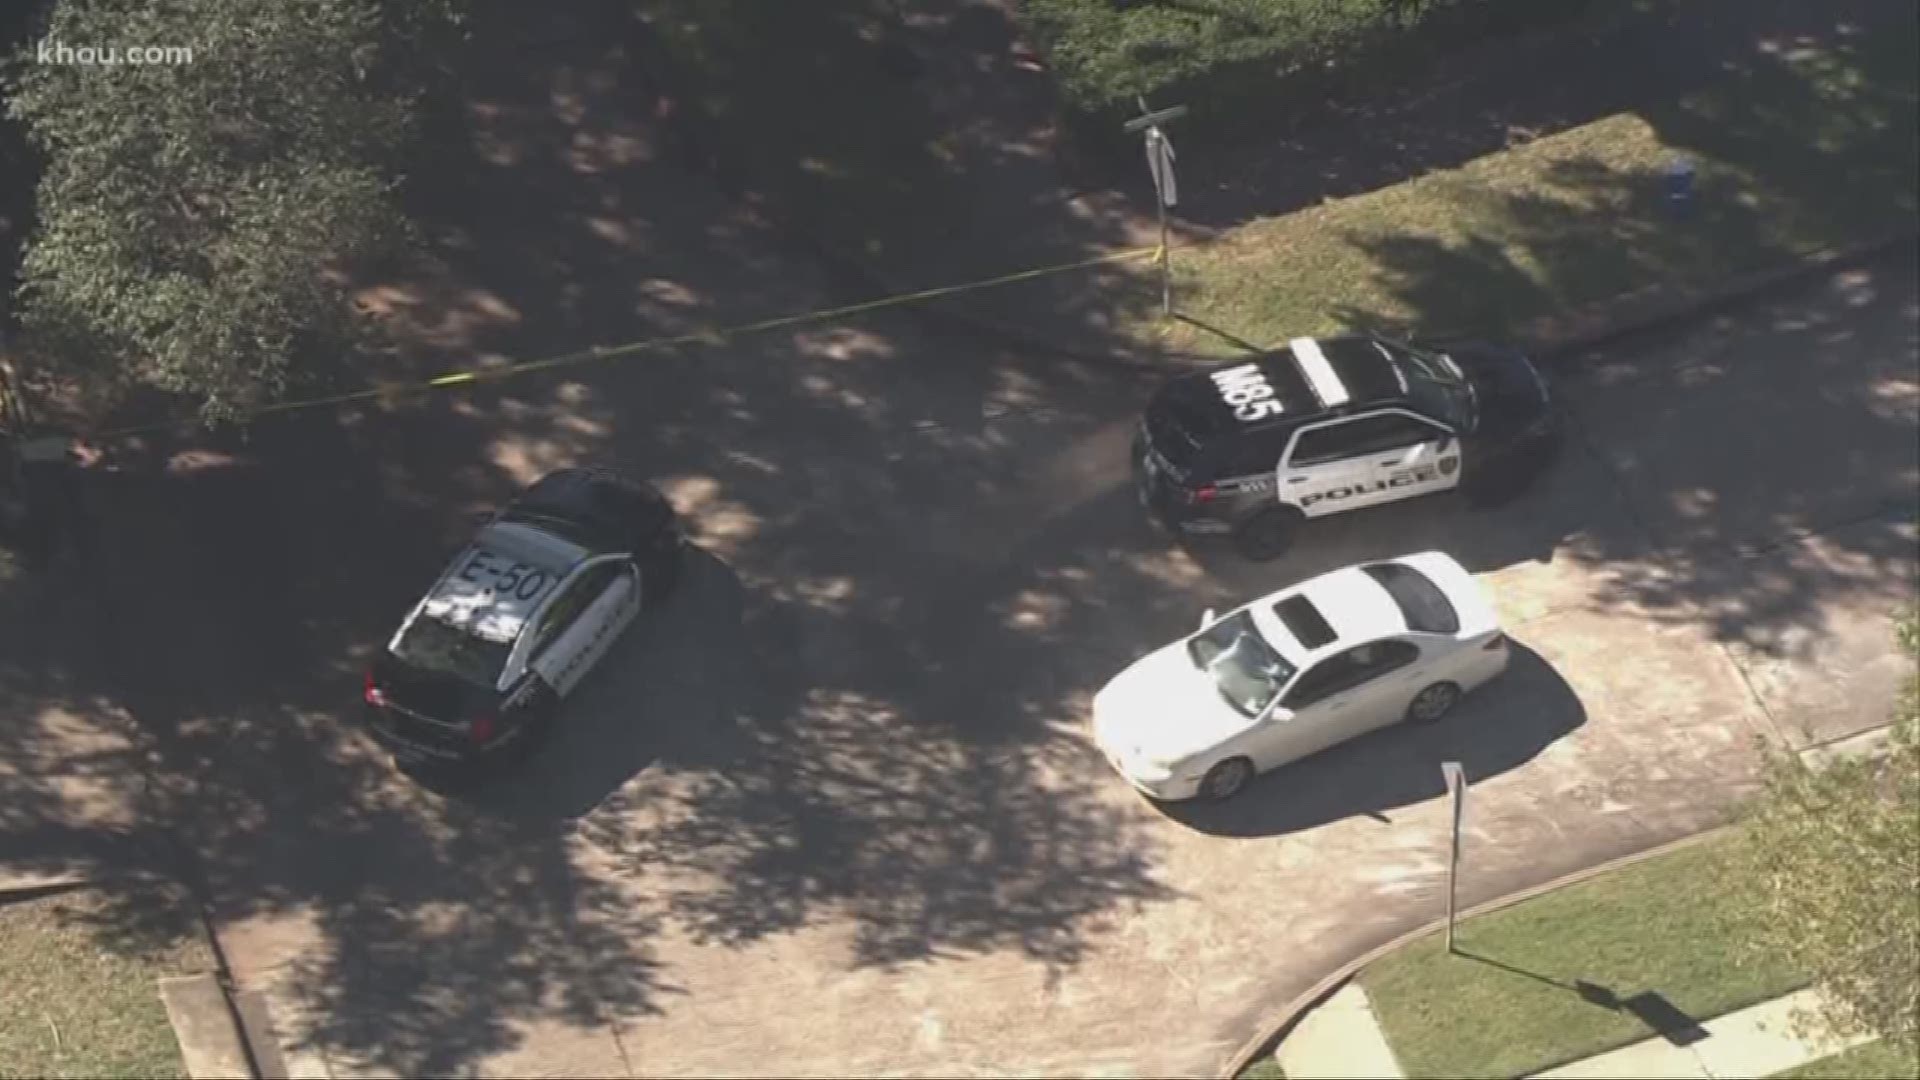 Houston police have responded to reports of a person shot in the Alief area. The shooting happened shortly before noon in the 10400 block of Huntington Estates, not far from Bisonnet and S. Dairy Ashford.